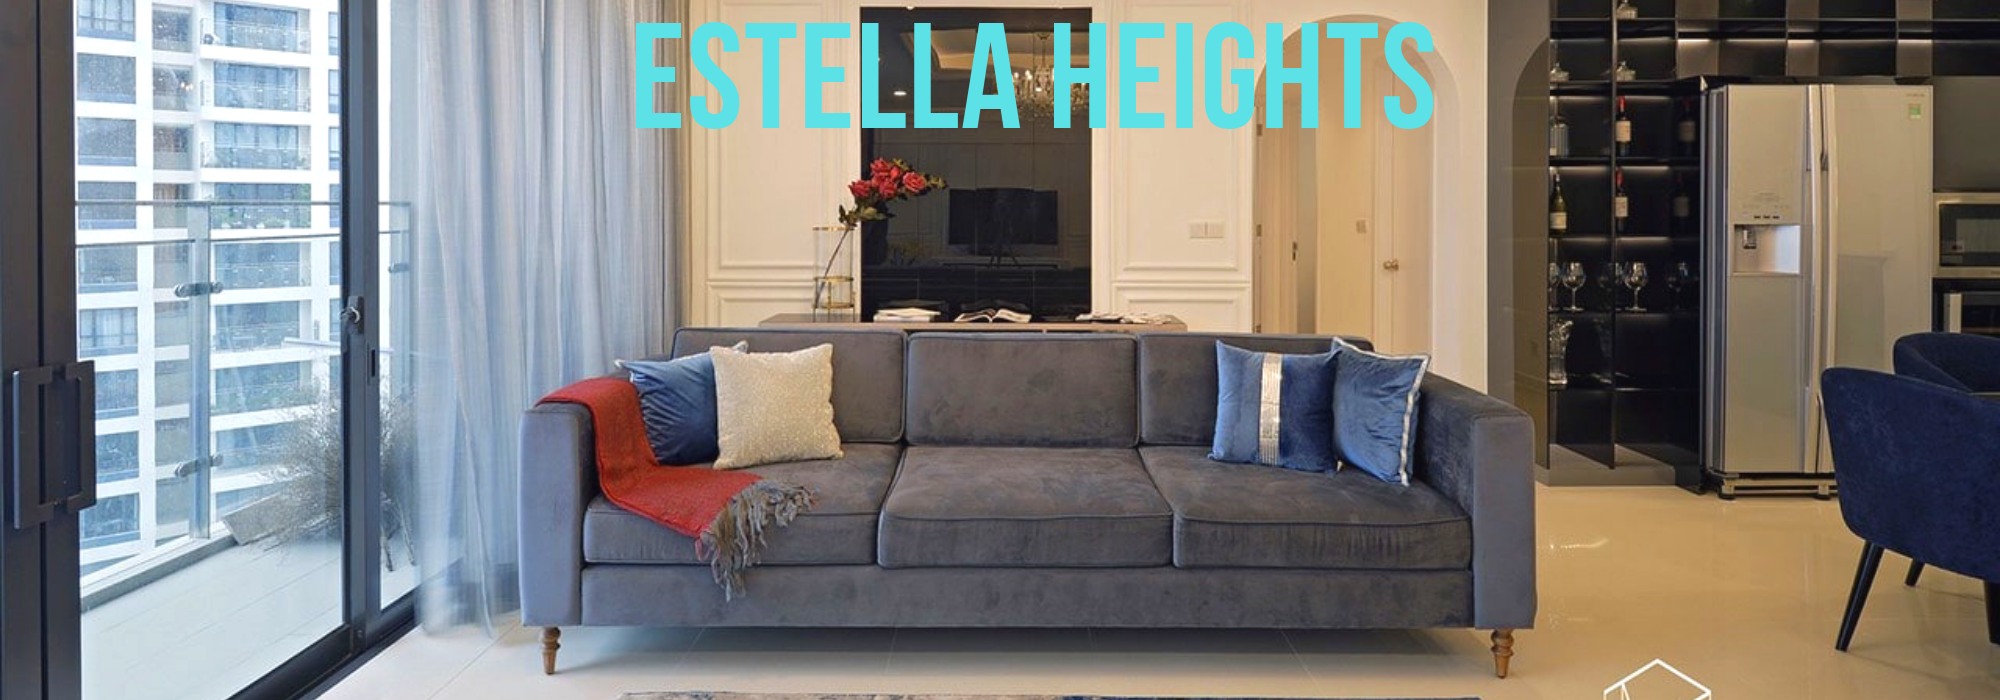 For sale Estella Heights 3 Bedroom Apartment, large space with 150 sq mt